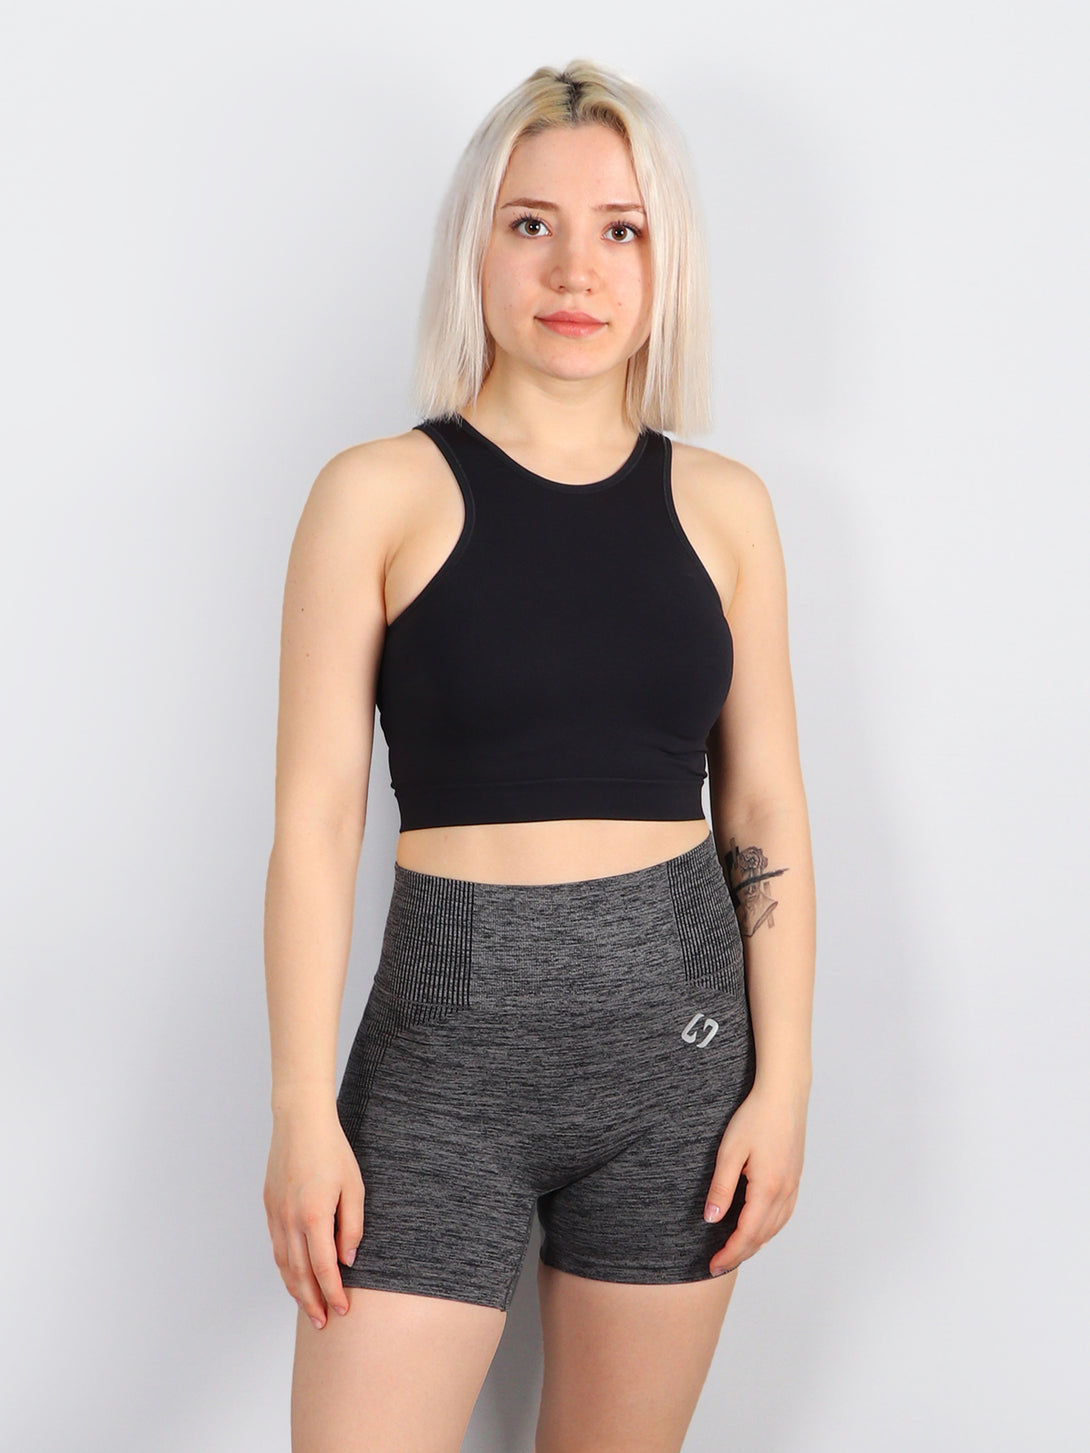 A Woman Wearing Black Color All-Day Seamless Sleeveless Crop Top